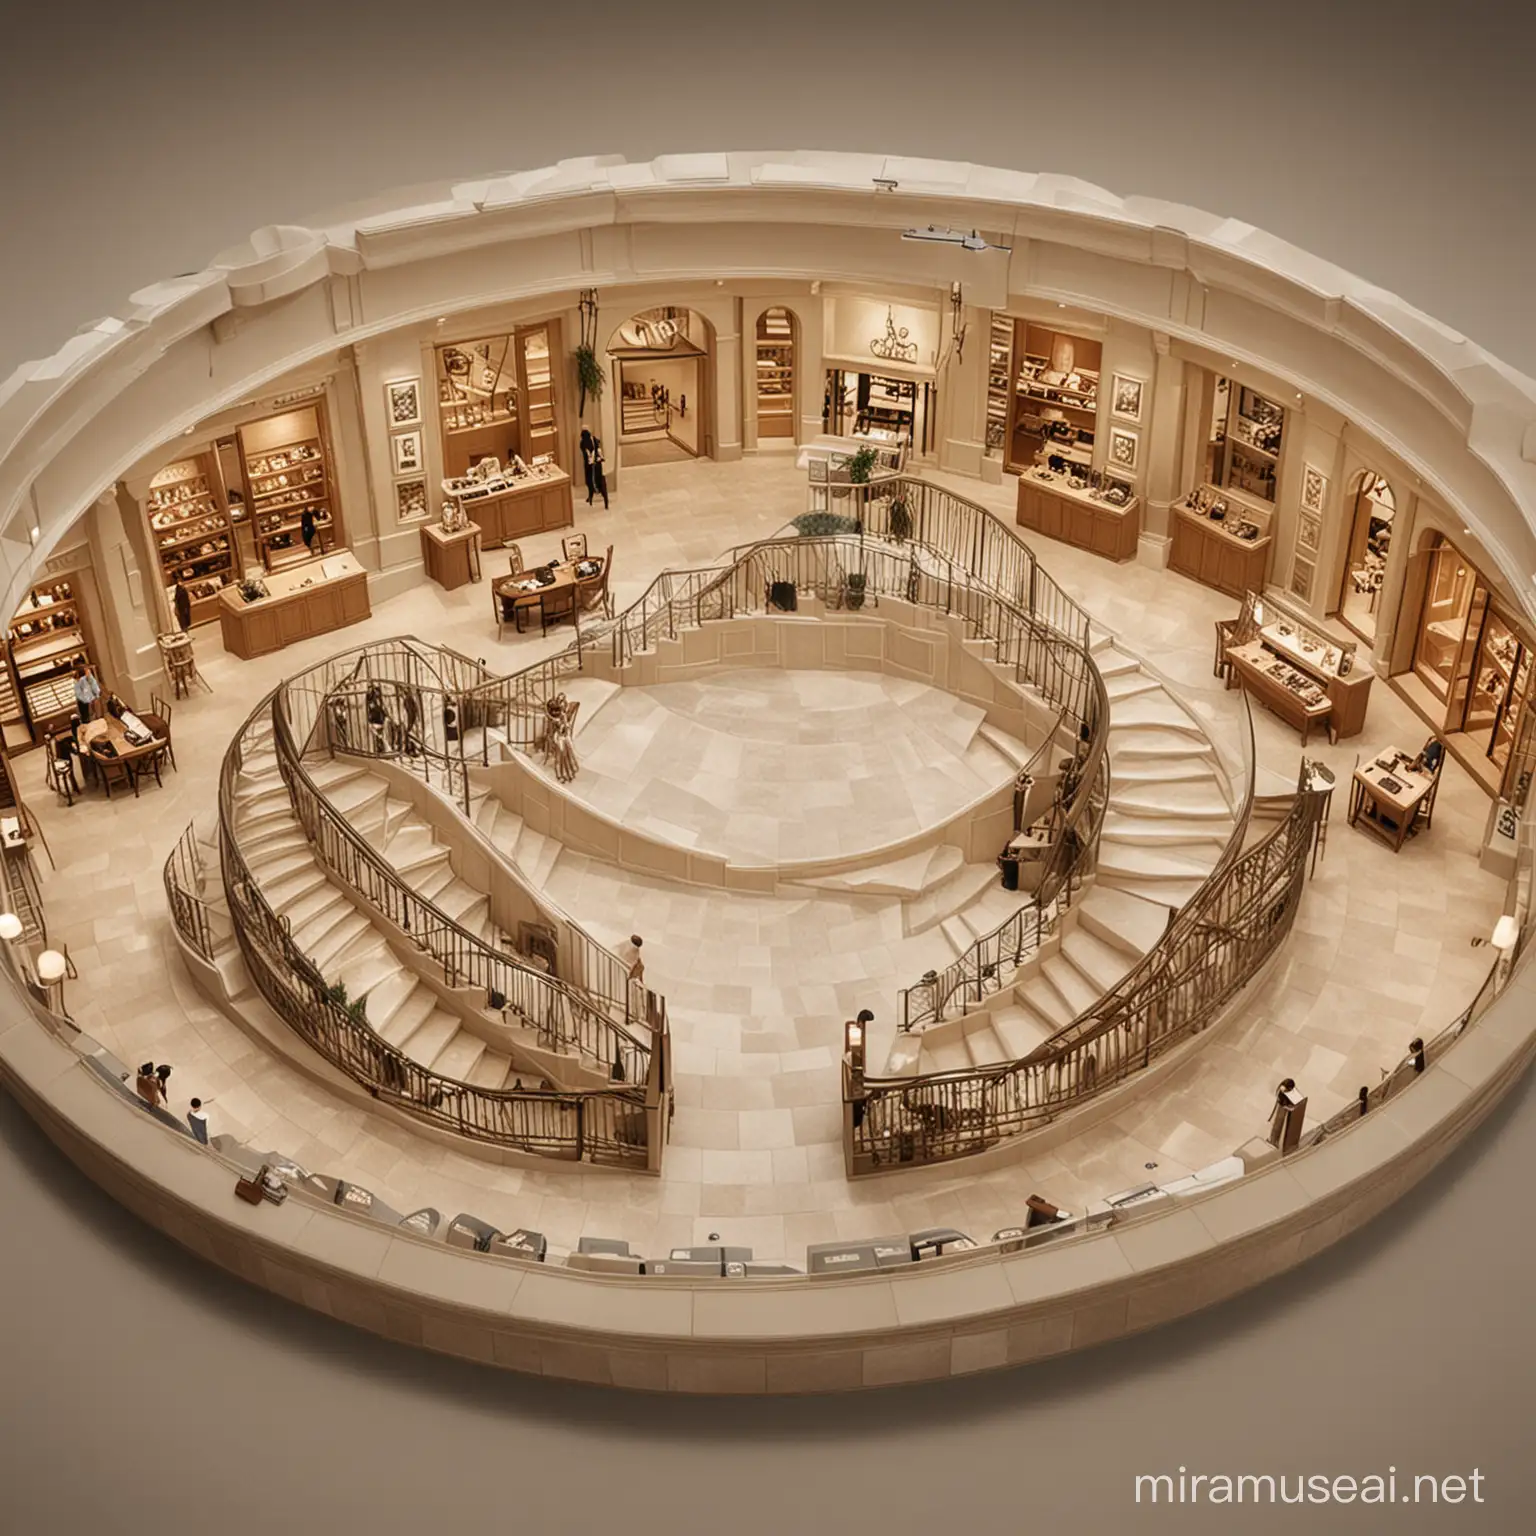 Ancient Fossil Emporium with Central Display and Regal Staircase